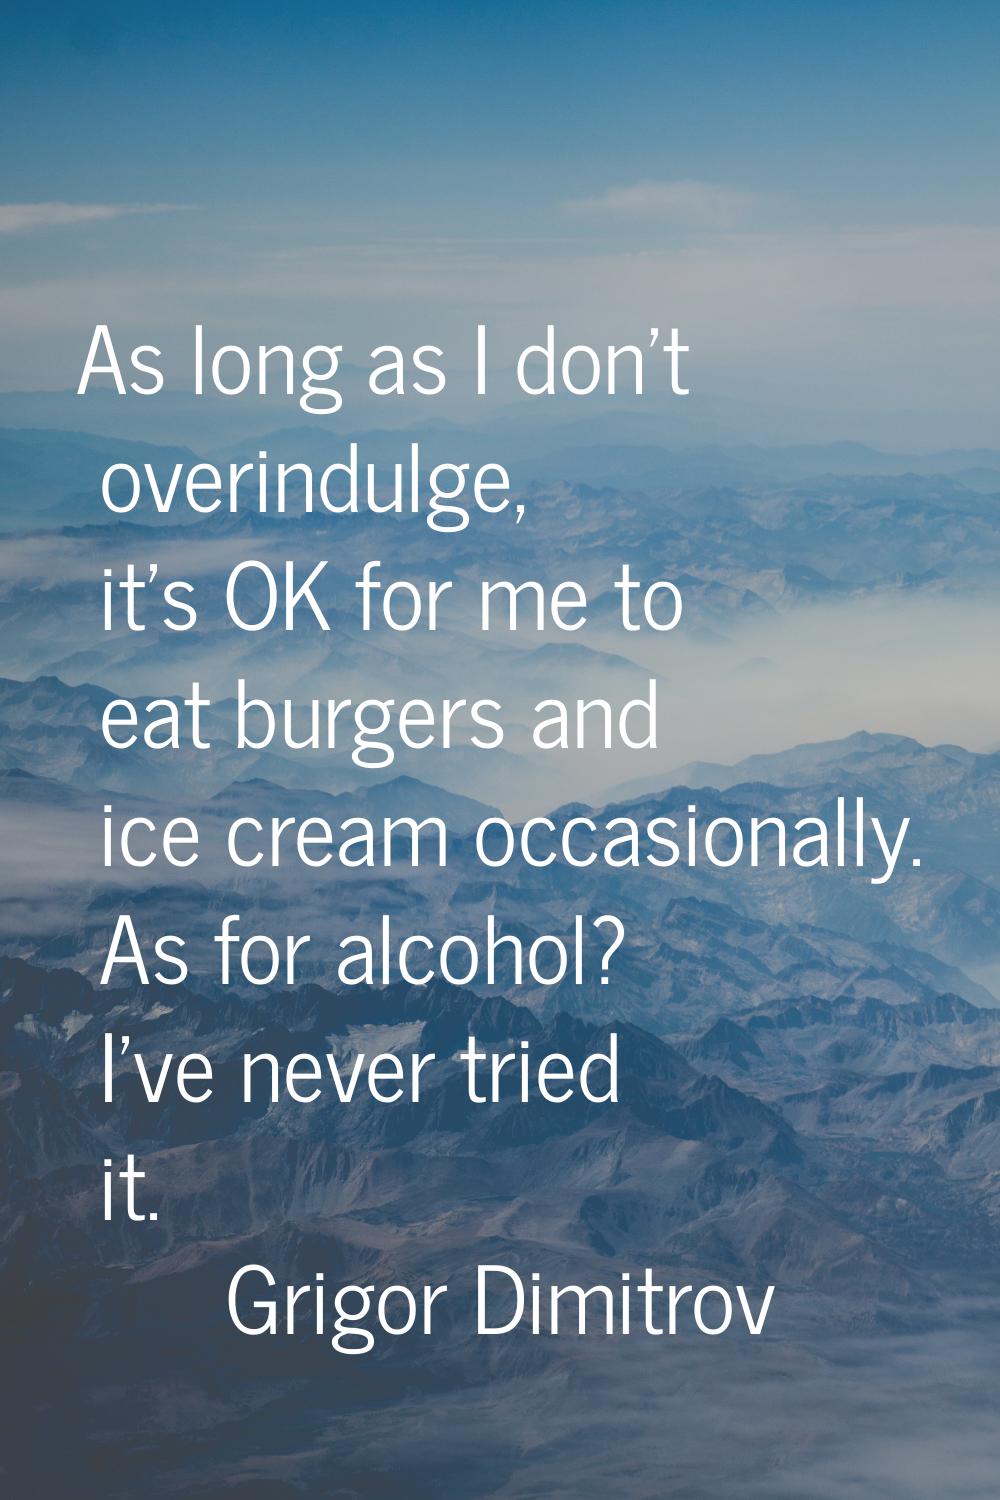 As long as I don't overindulge, it's OK for me to eat burgers and ice cream occasionally. As for al